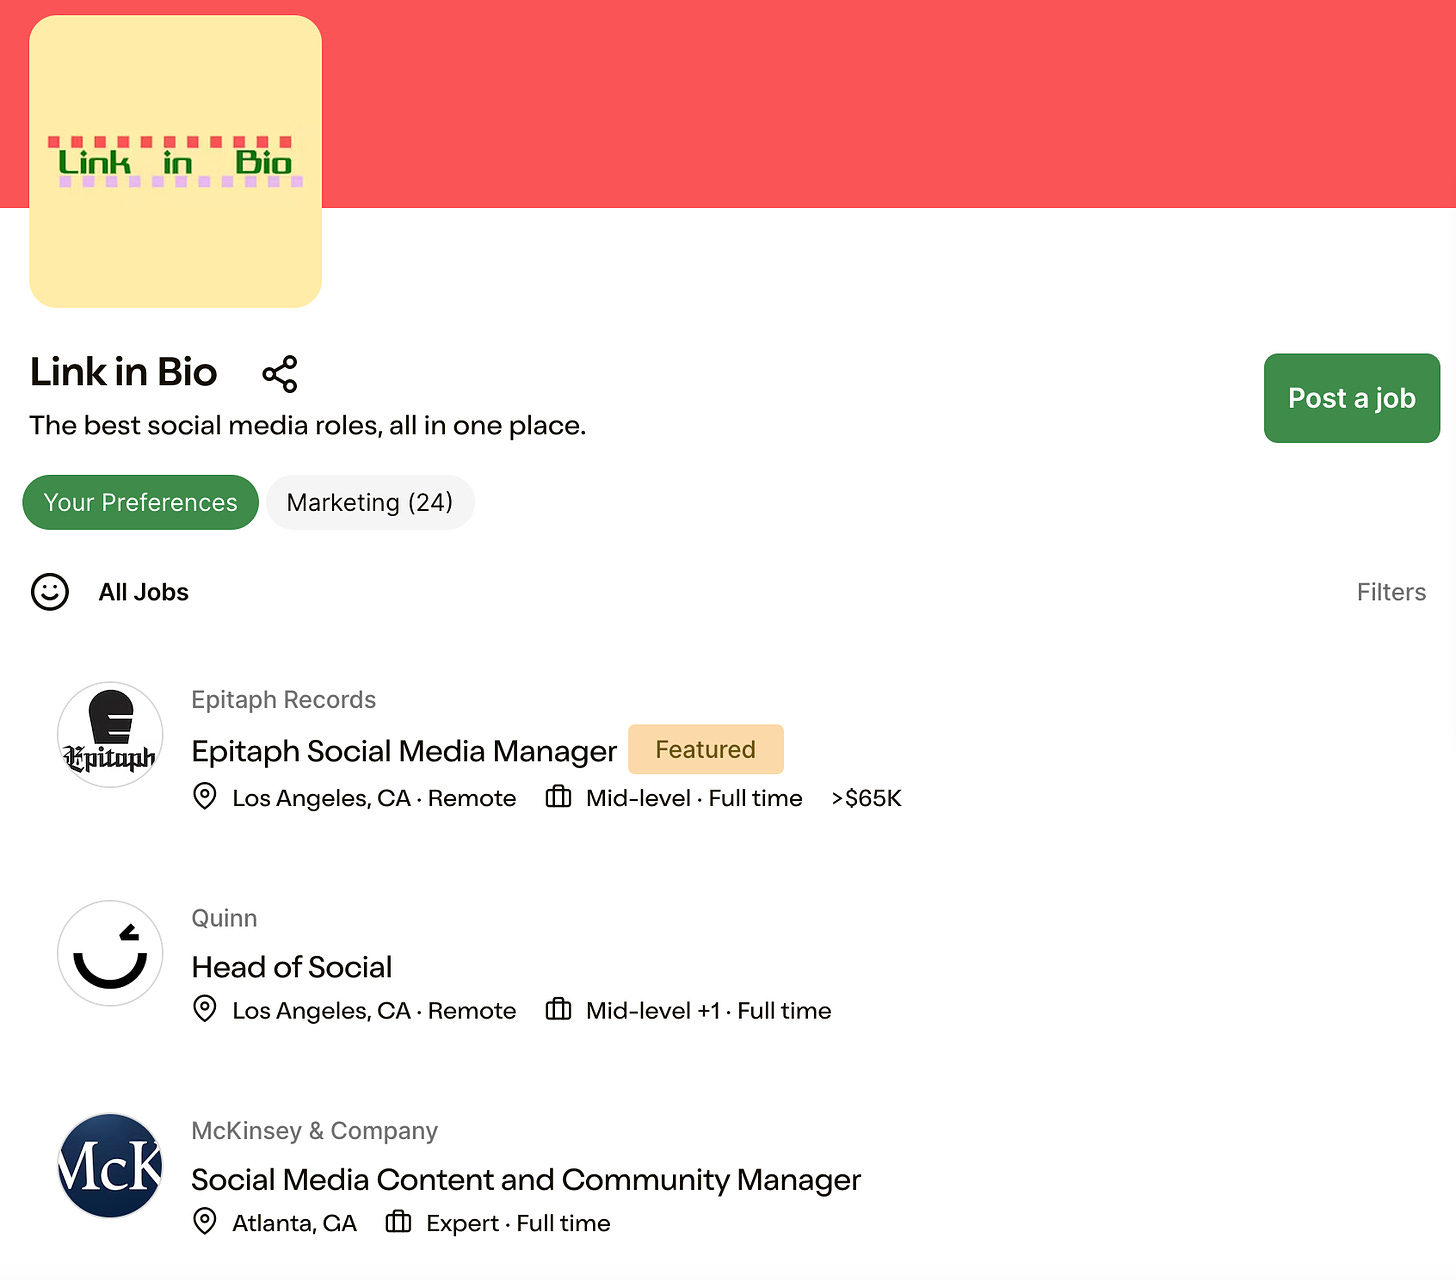 Screenshot of the Link in Bio job board with jobs from Epitaph Records, Quinn, and McKinsey and Company